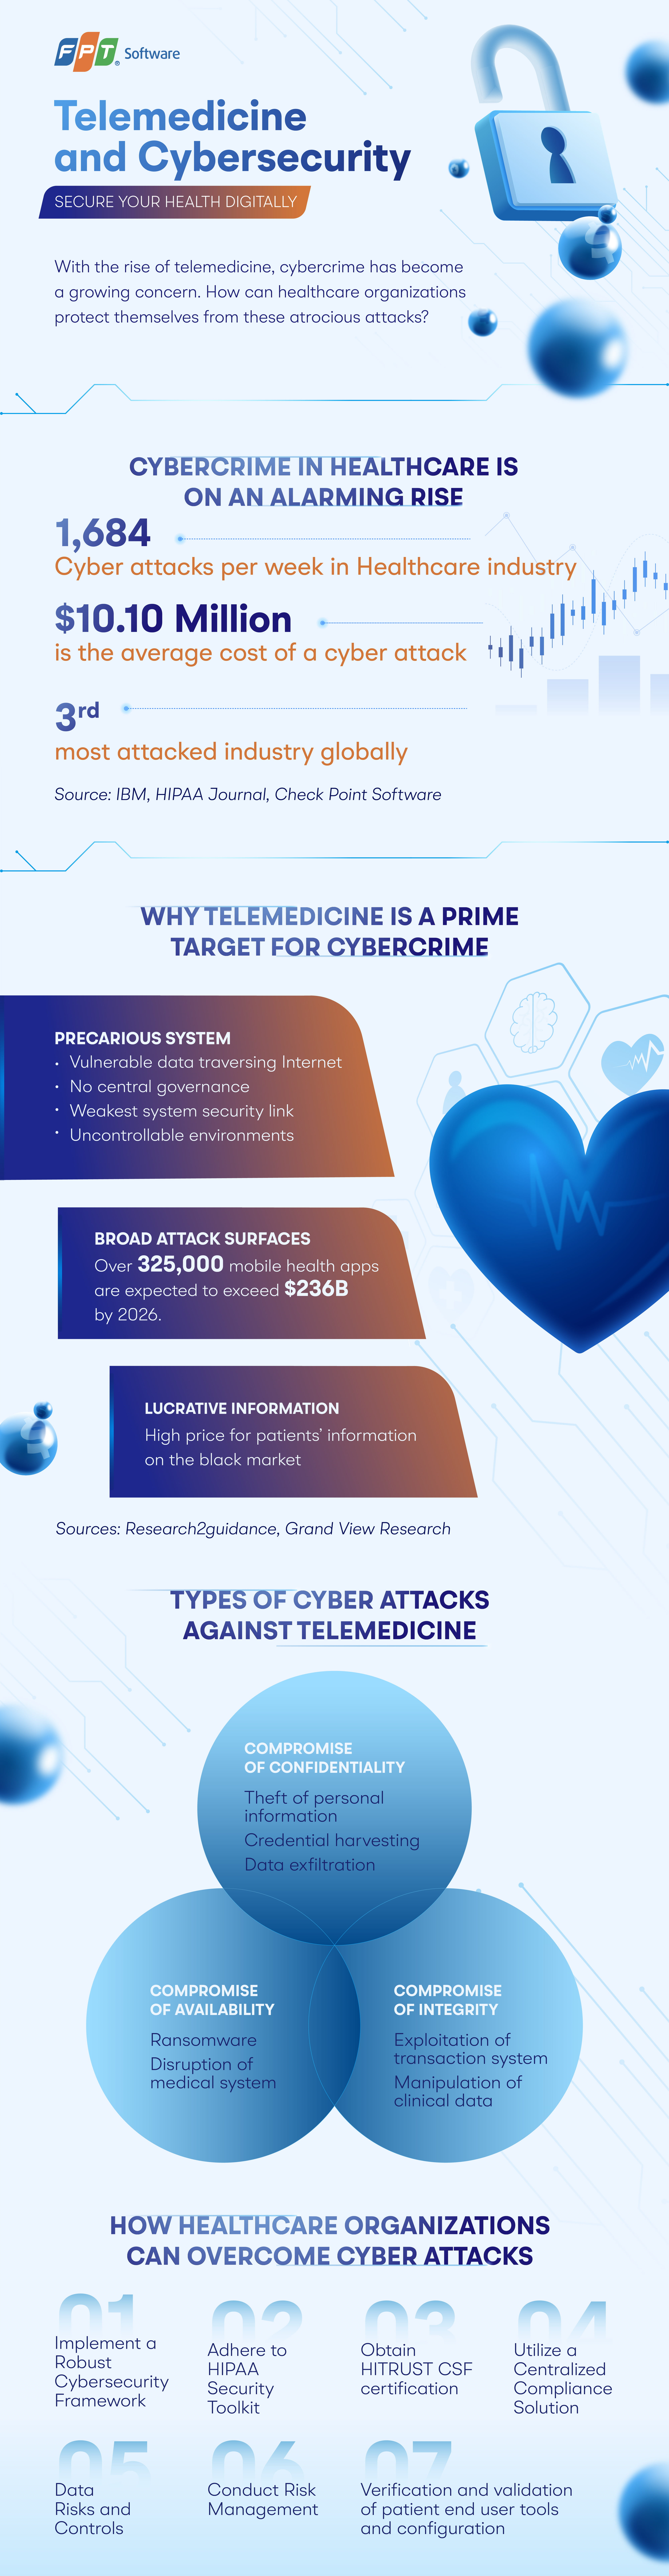 TELEMEDICINE-AND-CYBERSECURITY-02 (3)